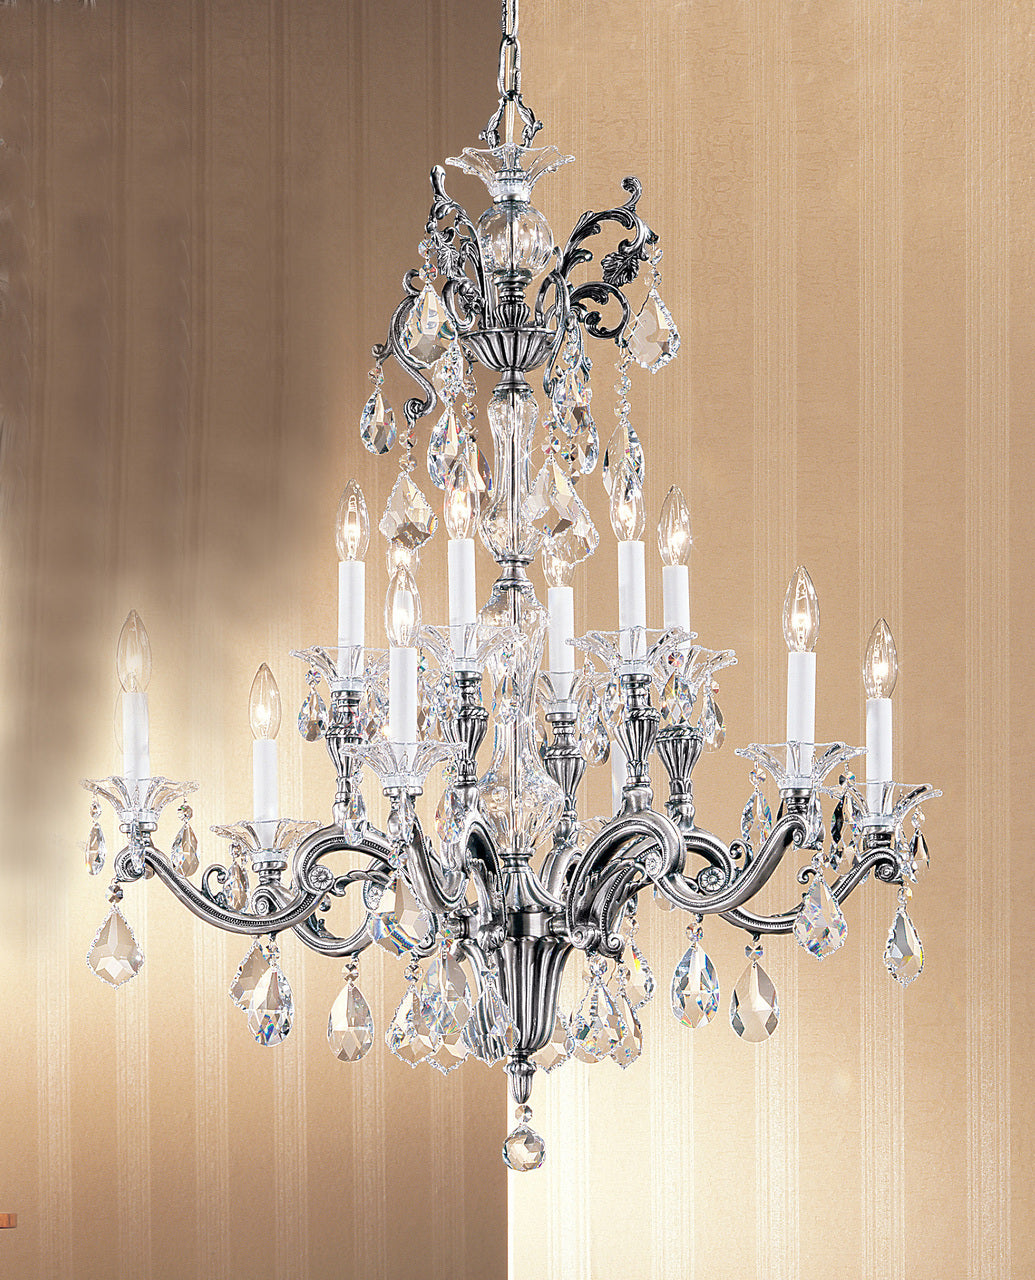 Classic Lighting 57112 MS C Via Firenze Crystal Chandelier in Millennium Silver (Imported from Spain)